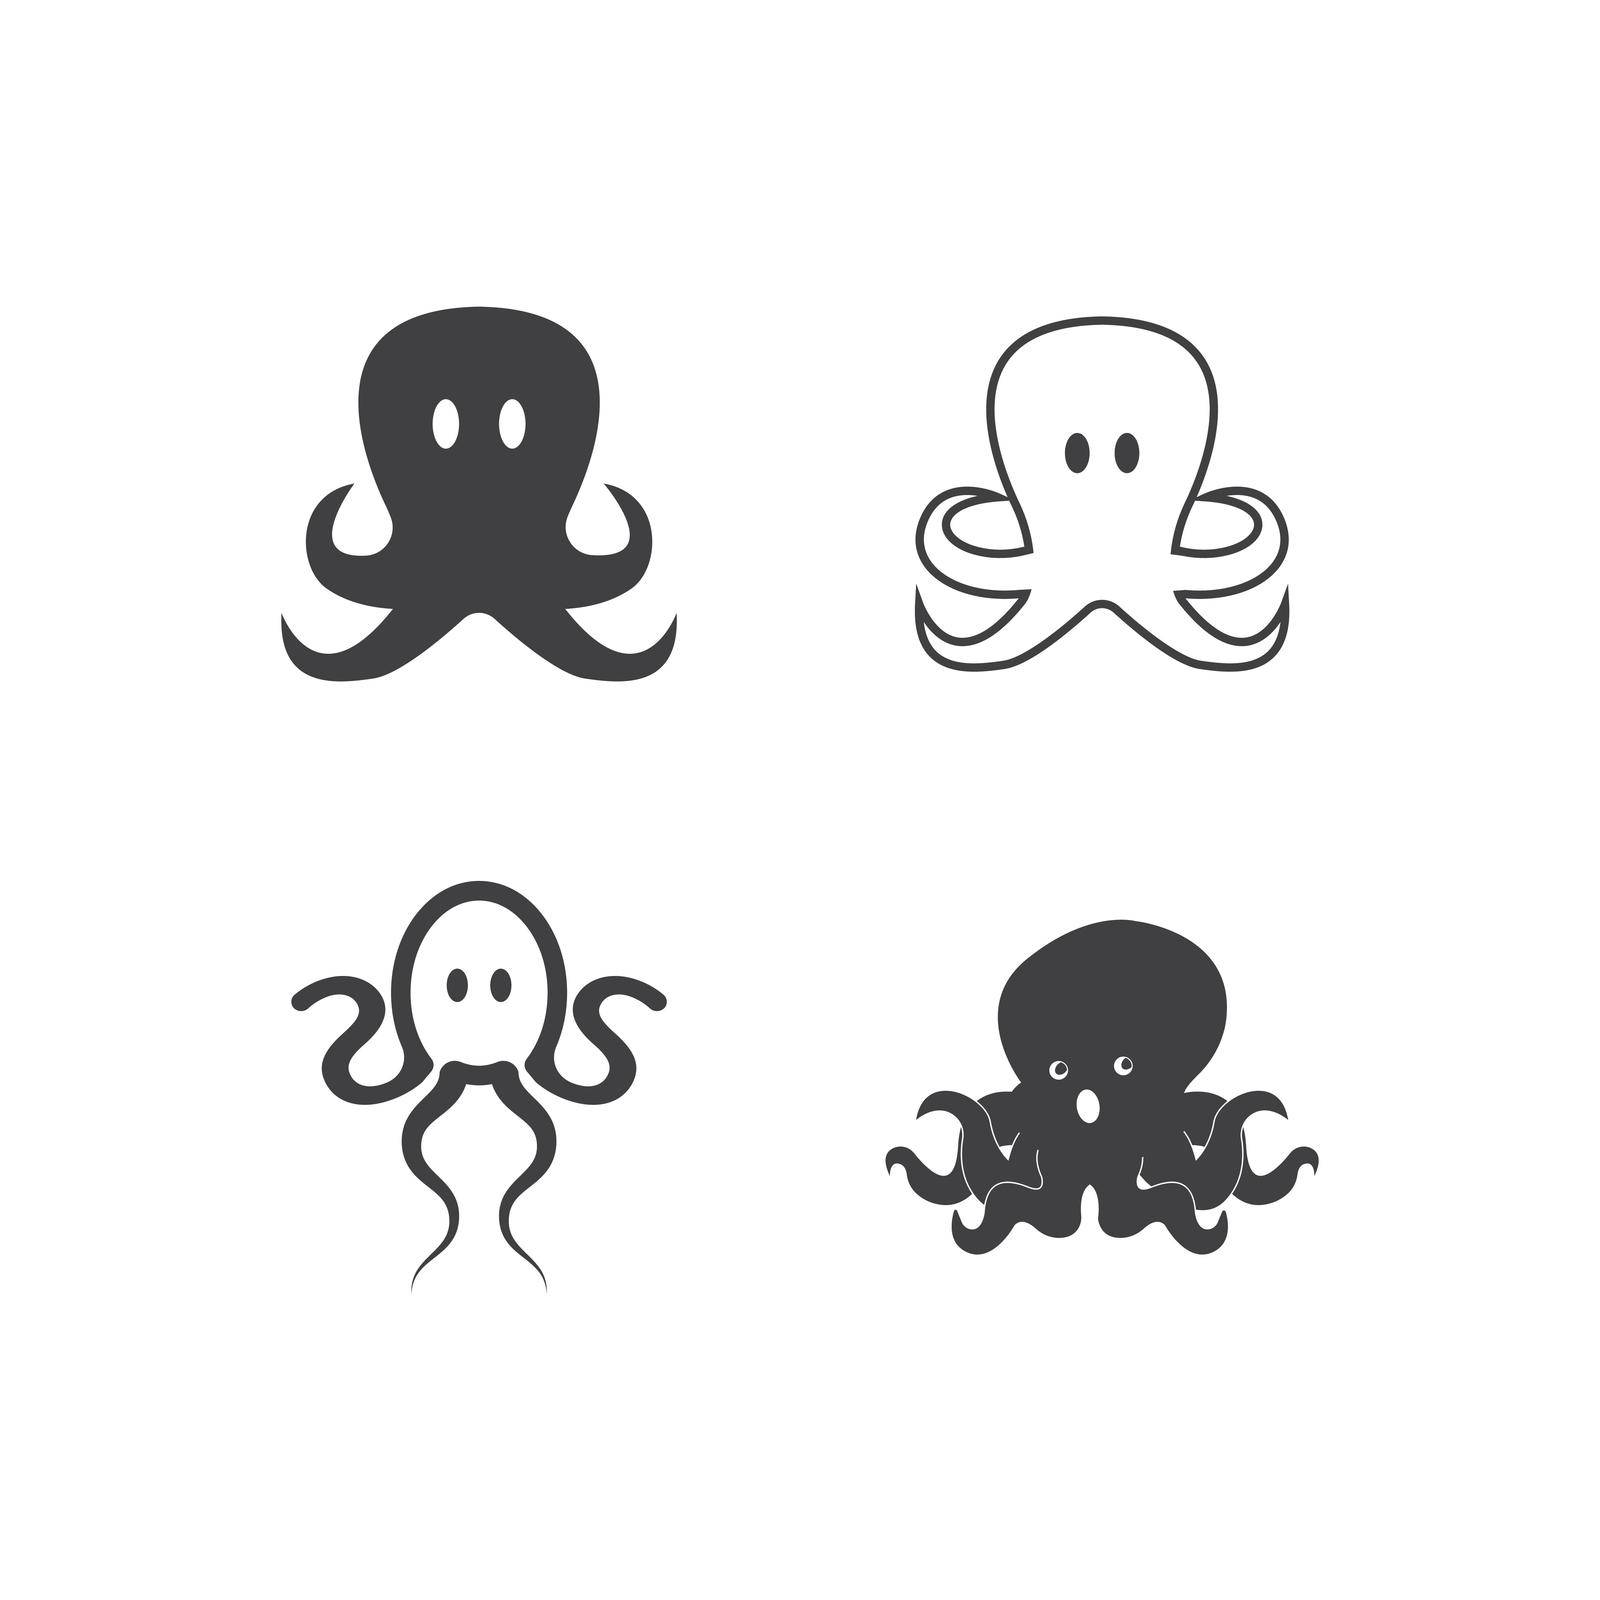 Octopus logo by rnking